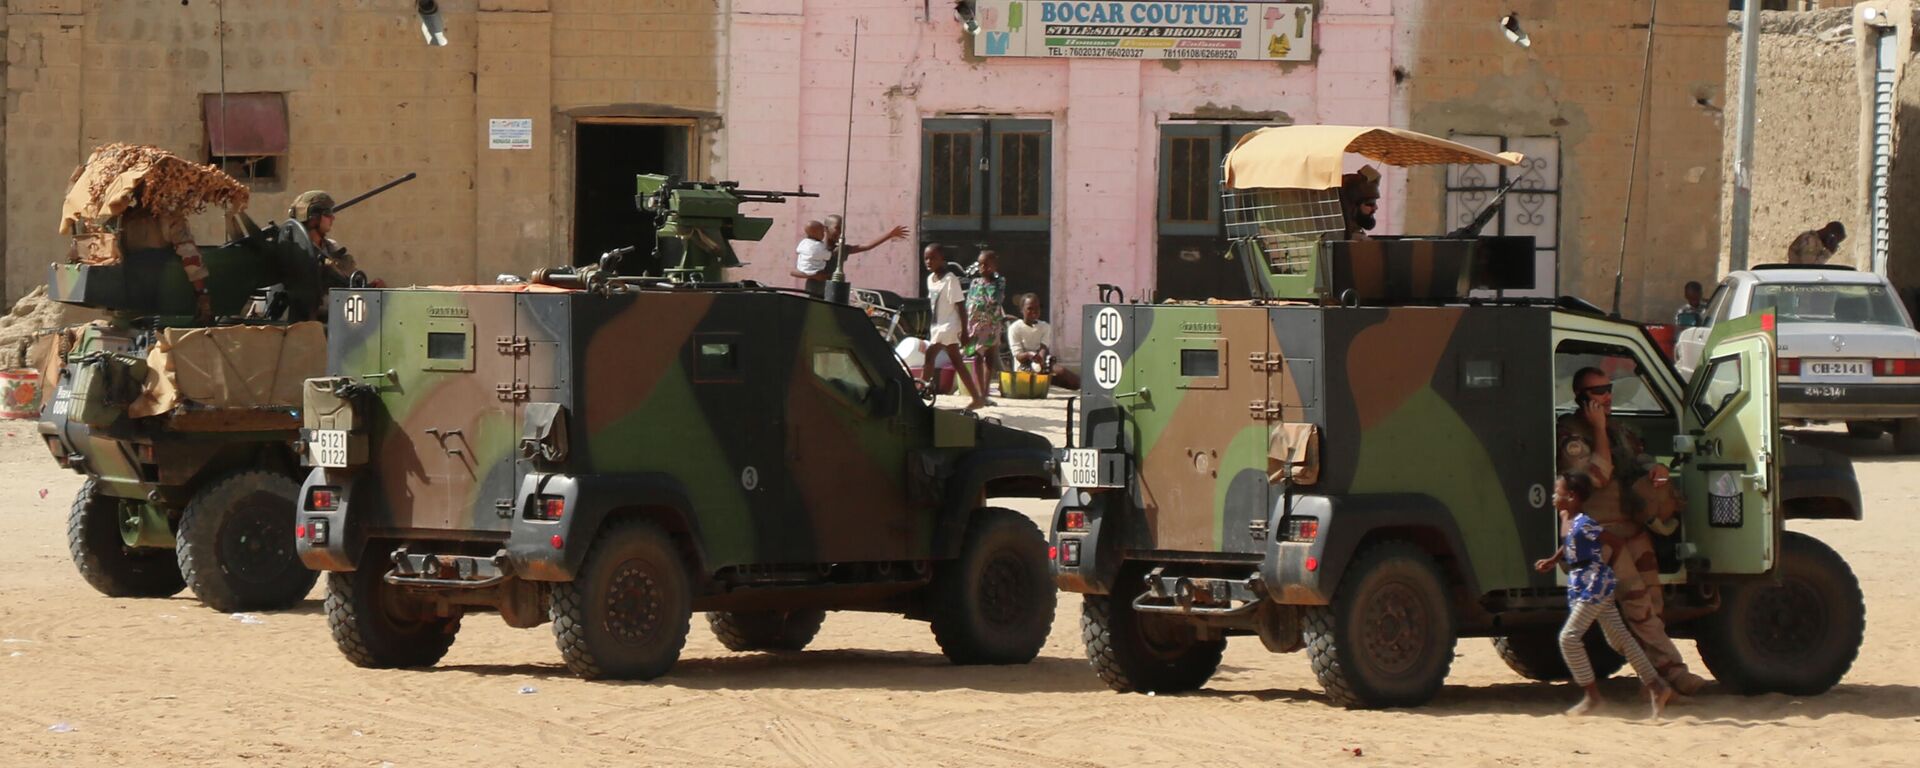 French Barkhane forces patrol the streets of Timbuktu, Mali, Wednesday Sept. 29, 2021. Many residents of Timbuktu are worried that when French troops pull out of the city in northern Mali, jihadis will return to impose strict Shariah law including public whippings and amputations. The Islamic extremists ruled Timbuktu in 2012 and banned music, sports and destroyed historic mausoleums, saying they were idolatrous. - Sputnik International, 1920, 04.05.2022